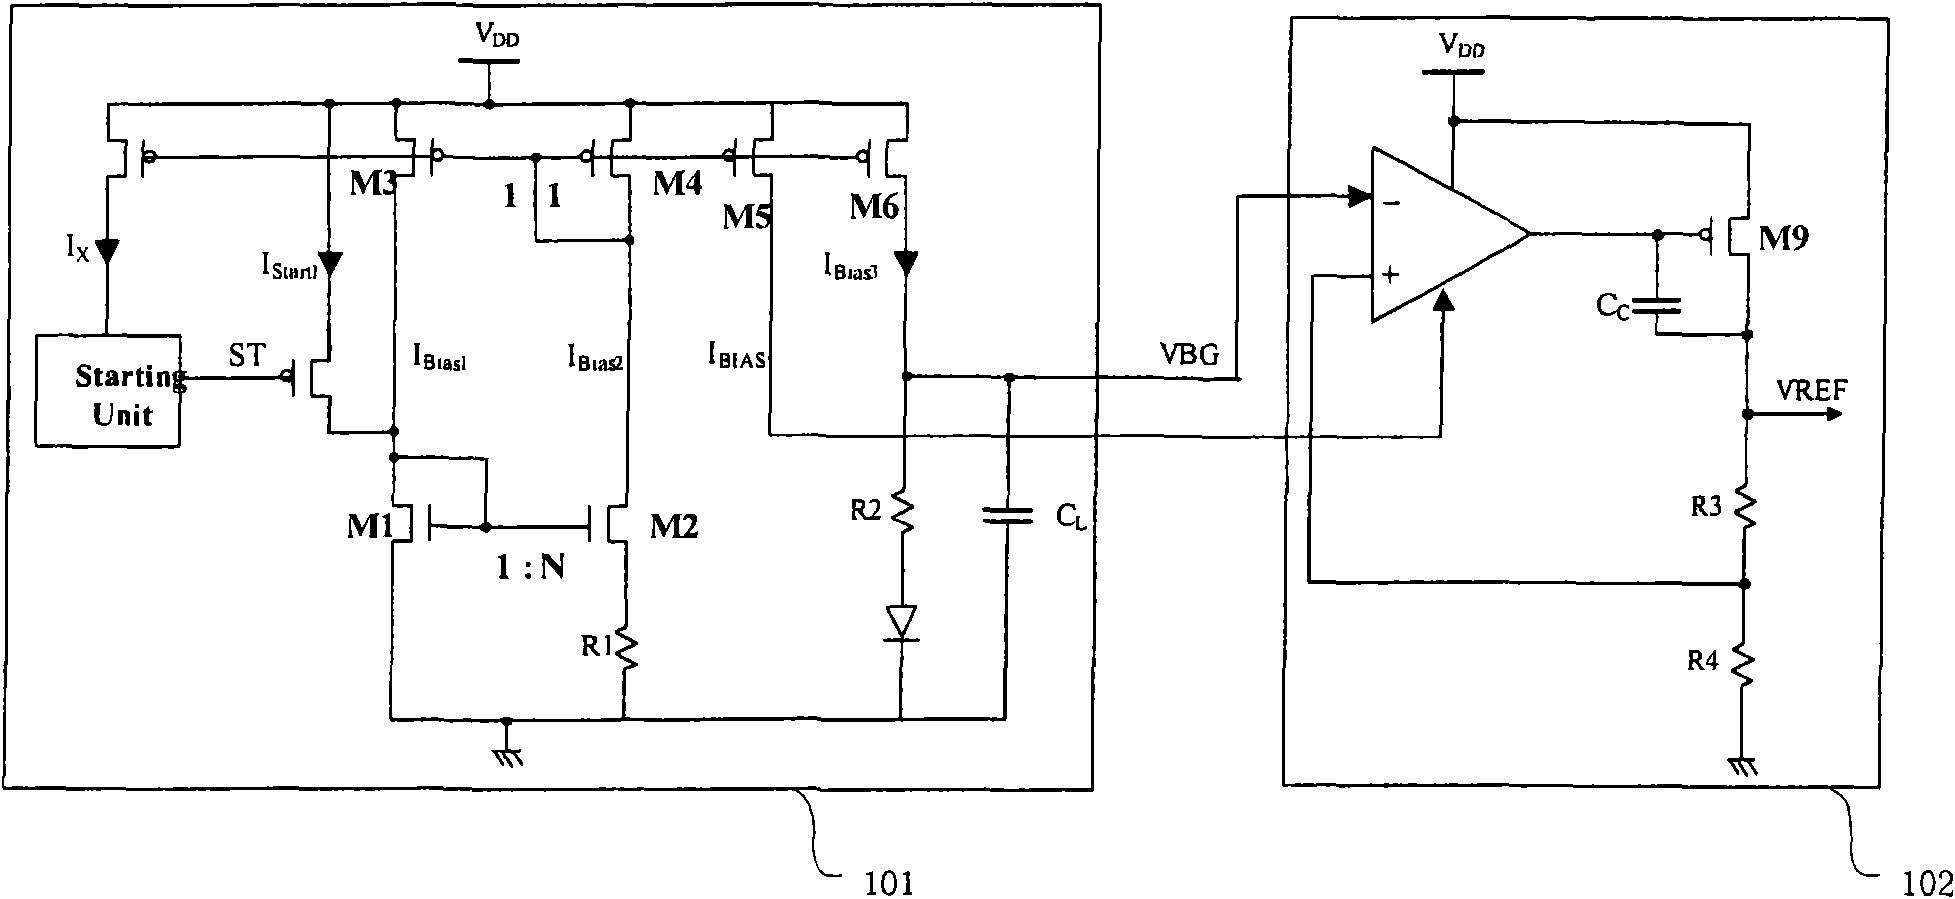 Voltage stabilizing circuit for preventing overshoot and reference circuit